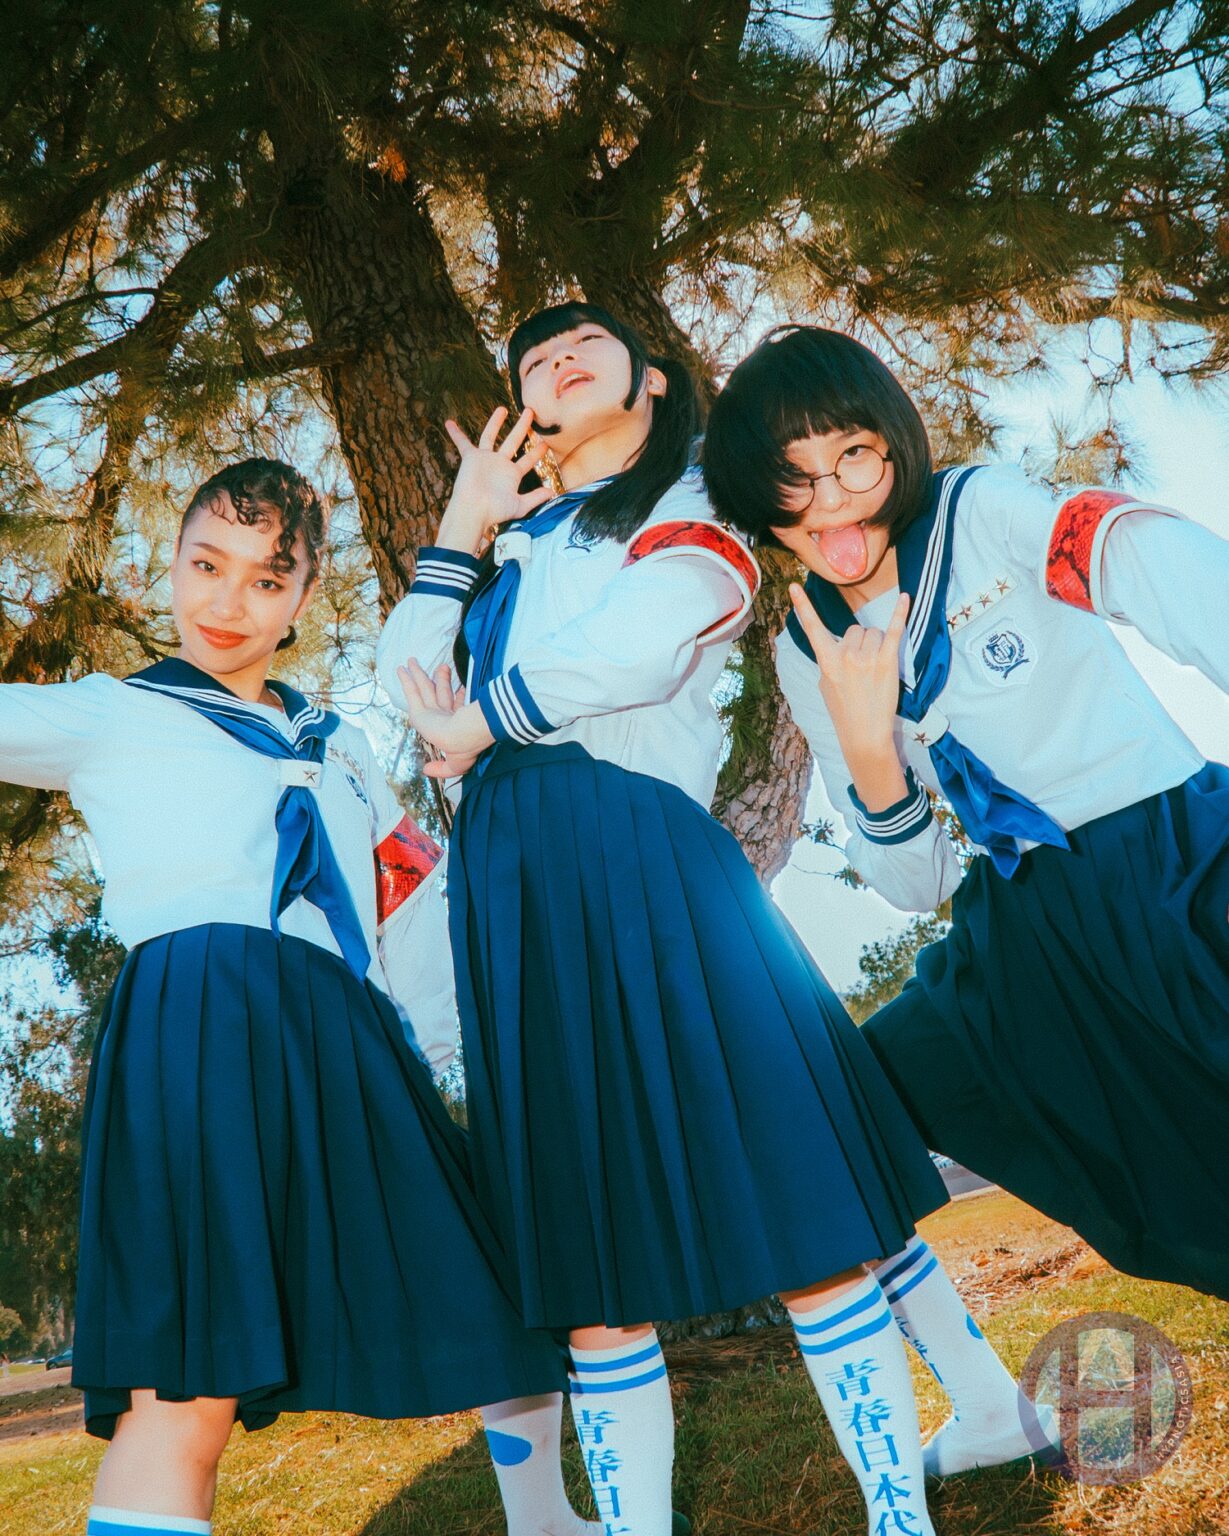 [exclusive Interview] Atarashii Gakko Say Spreading Our Culture Through Song And Dance To The